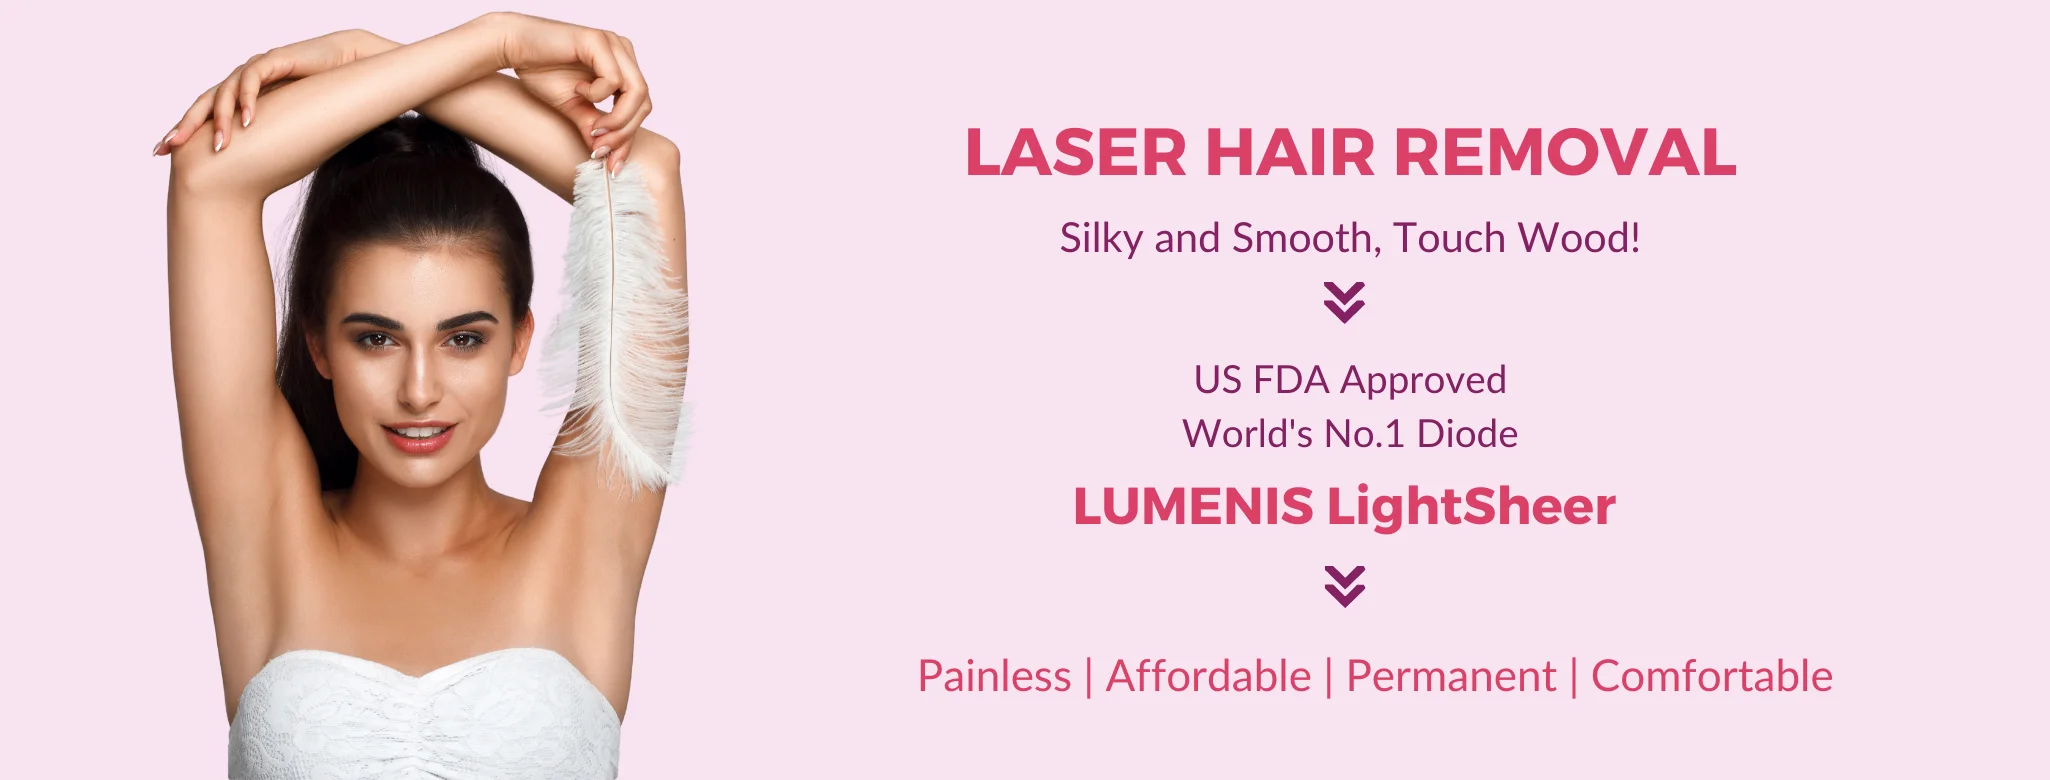 How much does permanent laser hair removal cost for women at a clinic   Quora